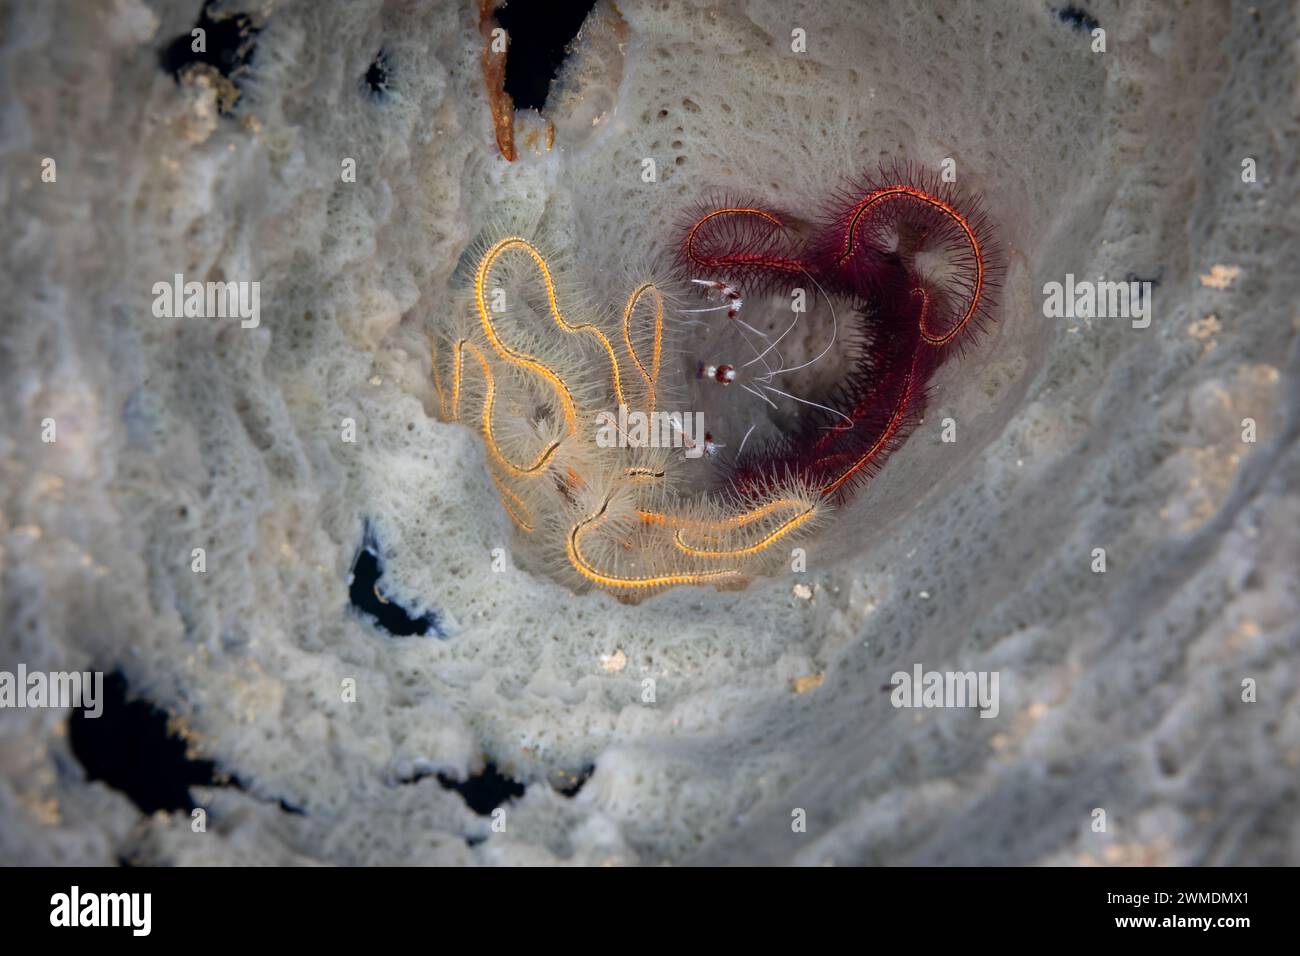 2 Brittle Starfish and a Banded Cleaner Shrimp hide in the tube of a vase Sponge Stock Photo